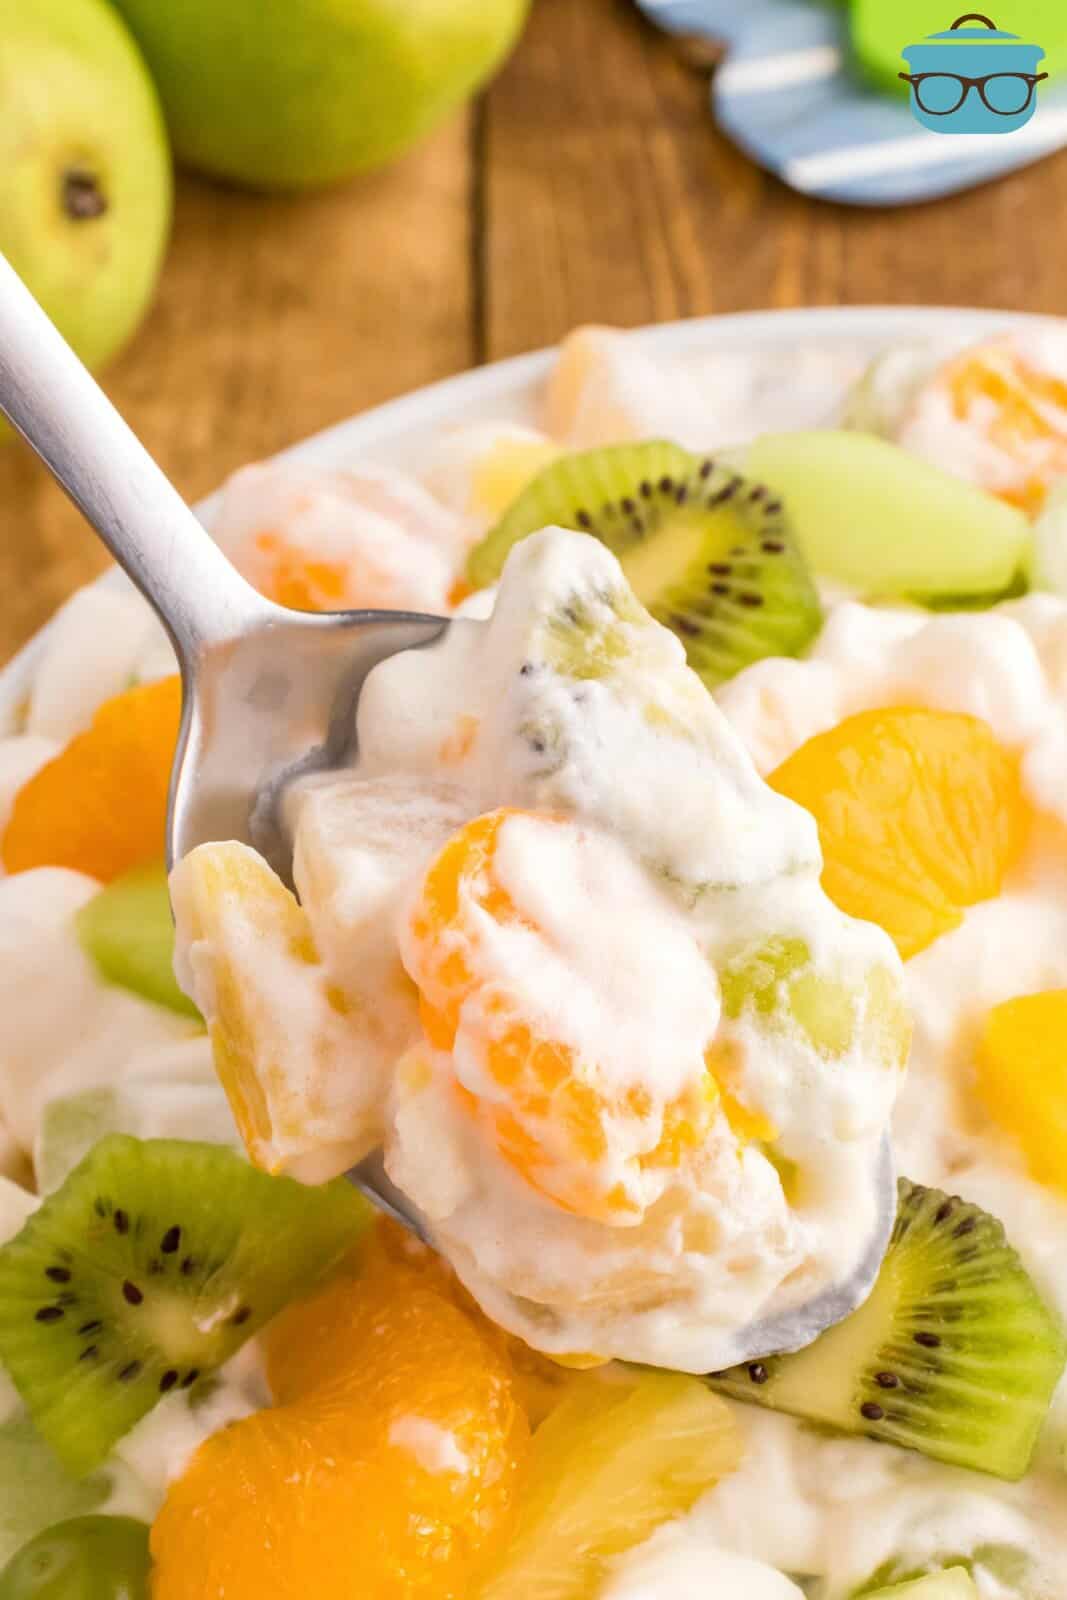 A spoon holding. a bite of ambrosia salad over a bowl.